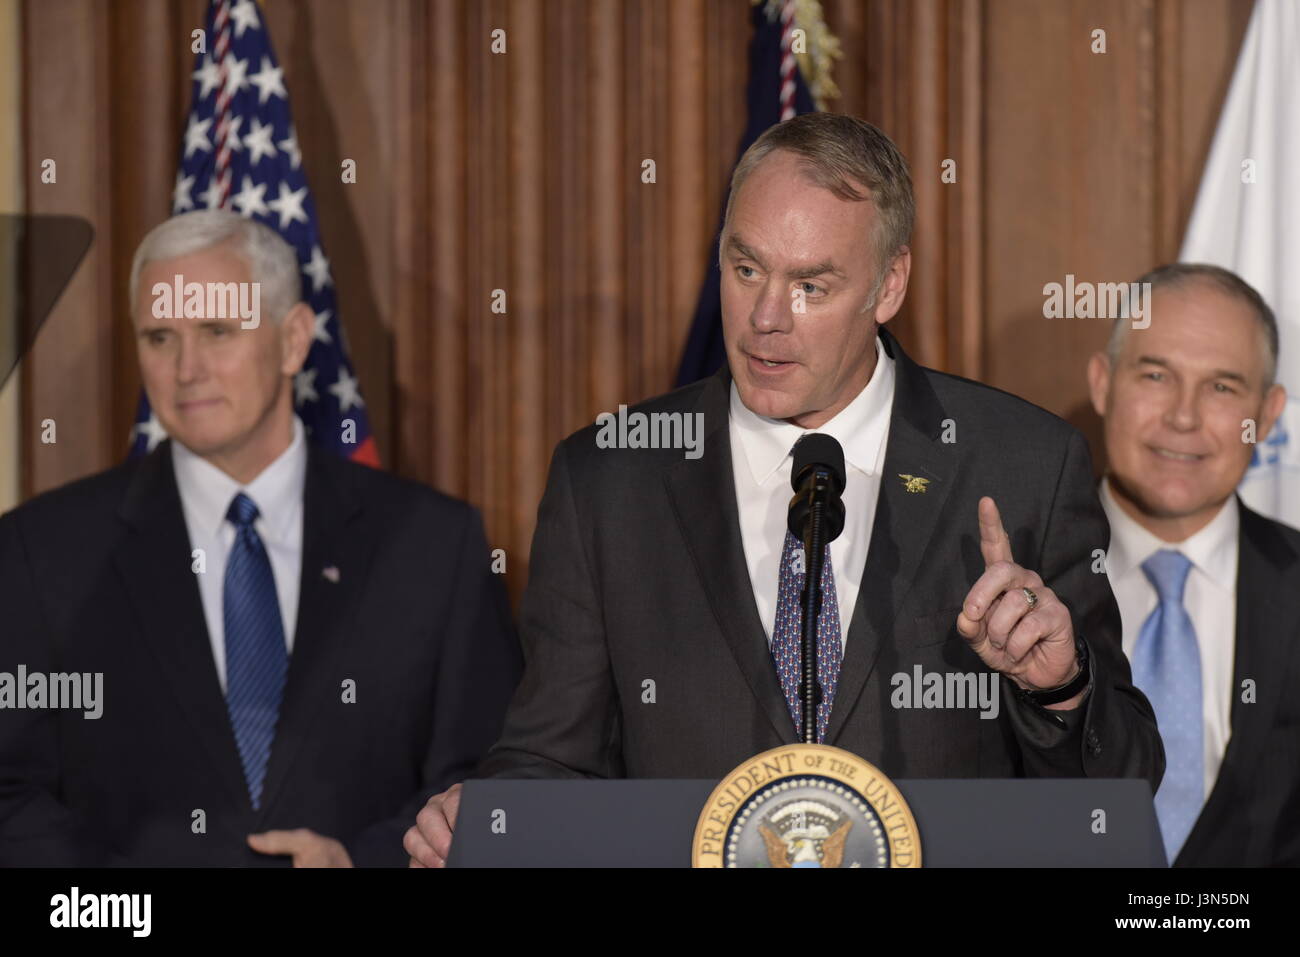 U.S. Interior Secretary Ryan Zinke delivers remarks at a signing ceremony for a series of anti-environmental executive orders aimed at repealing restrictions on coal at the Environmental Protection Agency headquarters March 28, 2017 in Washington, DC. The orders roll back at least 10 major Obama environmental regulations and fulfills a wish list from the fossil fuel industry. Stock Photo